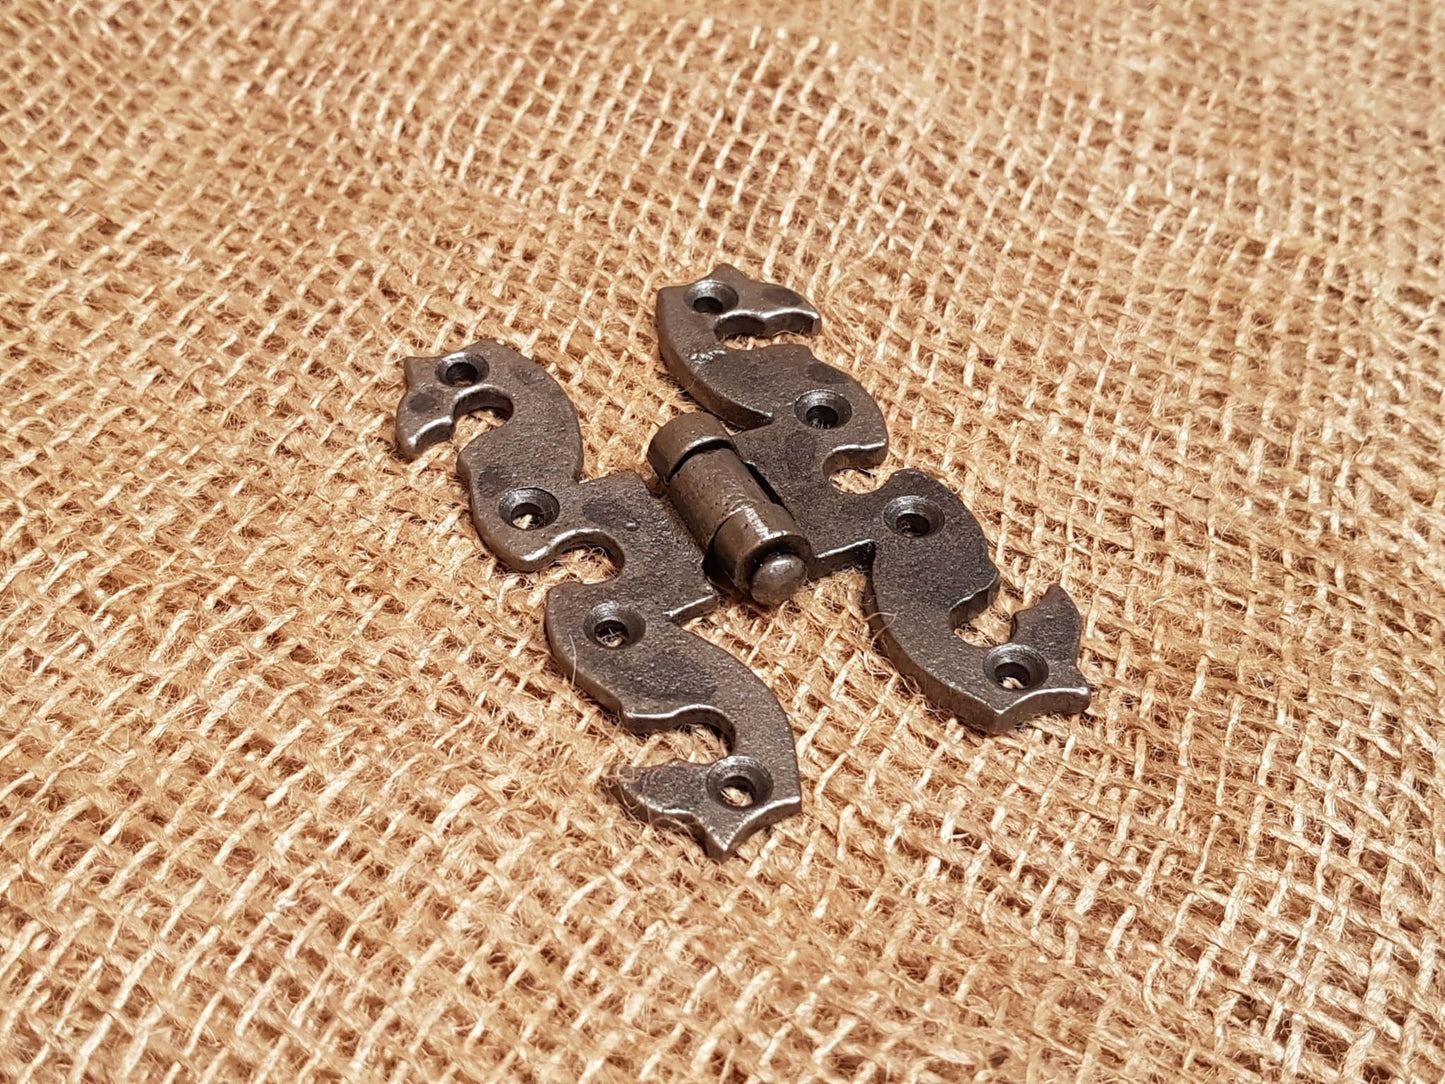 Snake Head Hinge - 4" Antique Iron - Spearhead Collection - Hinges - Door Hardware, Hardware, Hinges, Millwork Hardware, Rusted Finish